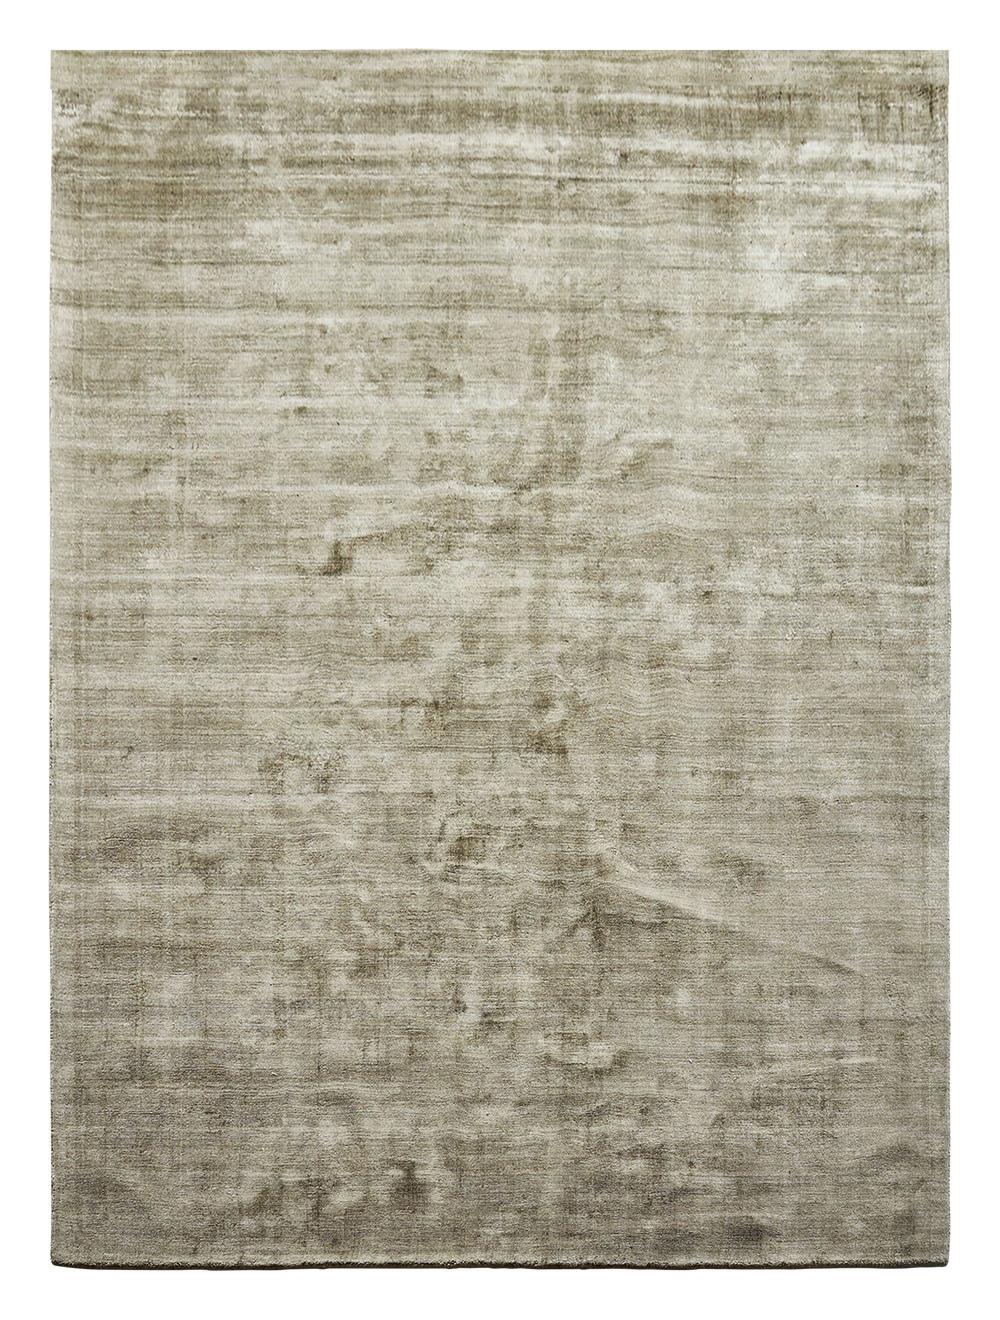 Olive Green Karma Carpet by Massimo Copenhagen.
Handwoven.
Materials: 100% Recycled Bamboo.
Dimensions: W 250 x H 350 cm.
Available colors: Light Grey, Nougat Brown, Washed Blue, and Olive Green.
Other dimensions are available: 160x230 cm,